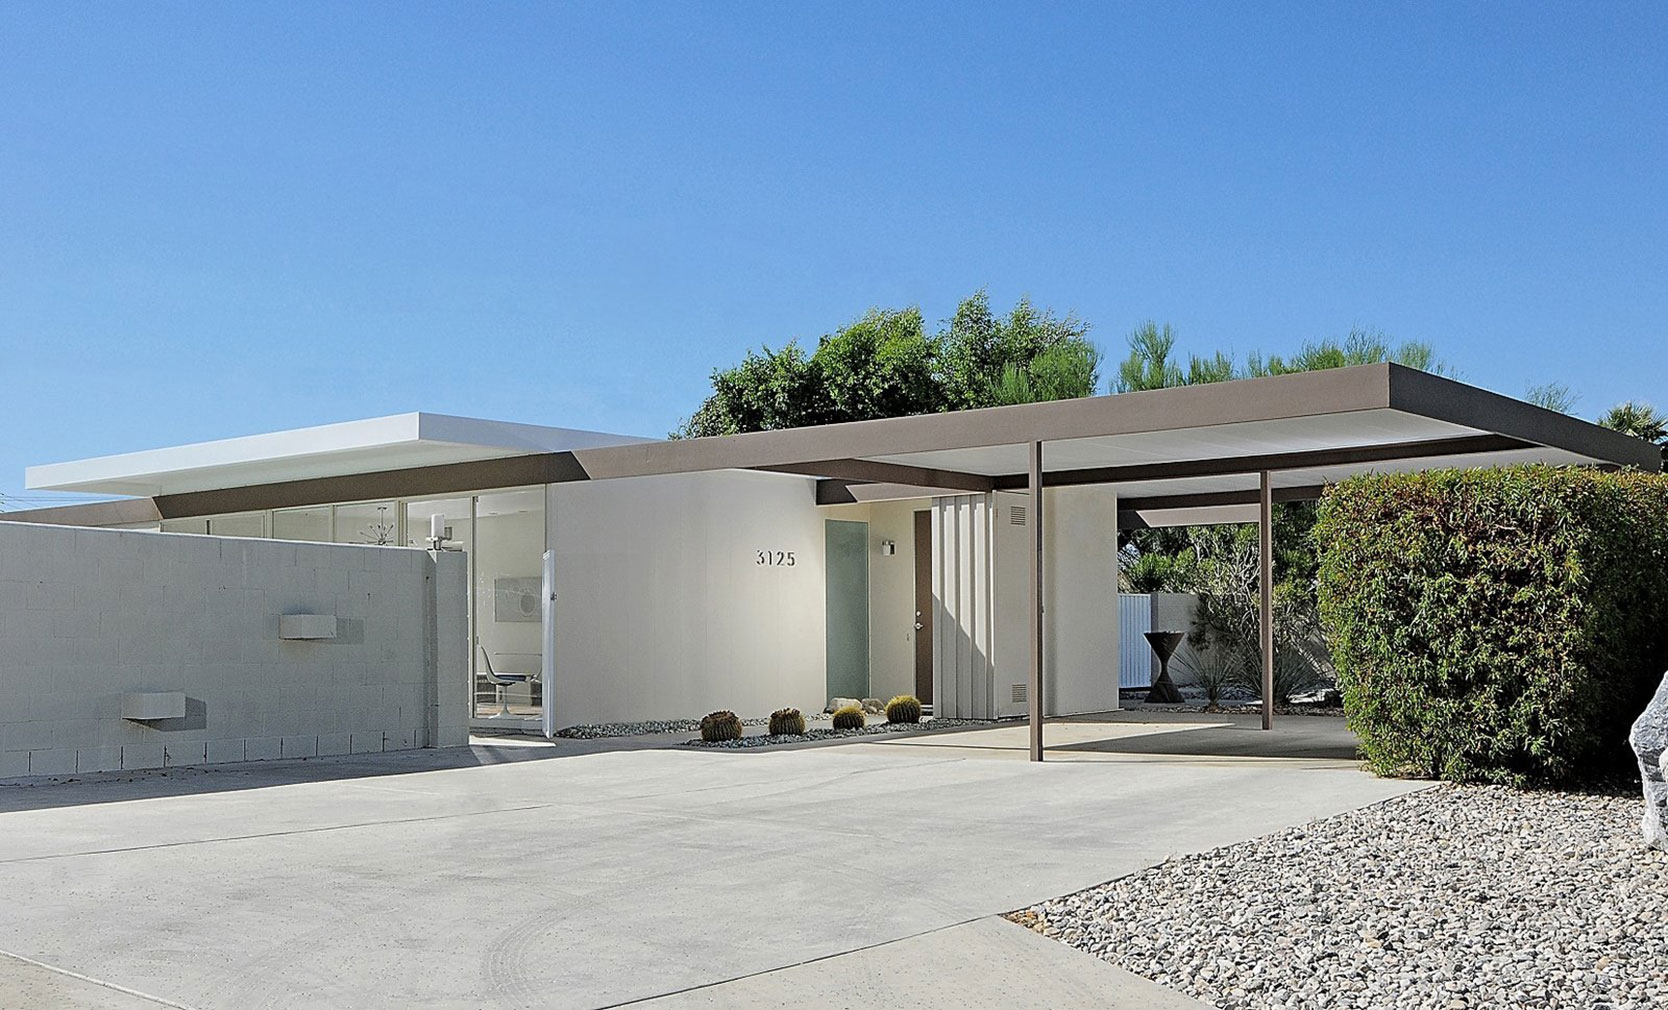 Radical 1960s prefab home in Palm Springs designed by Donald Wexler and Richard Harrison